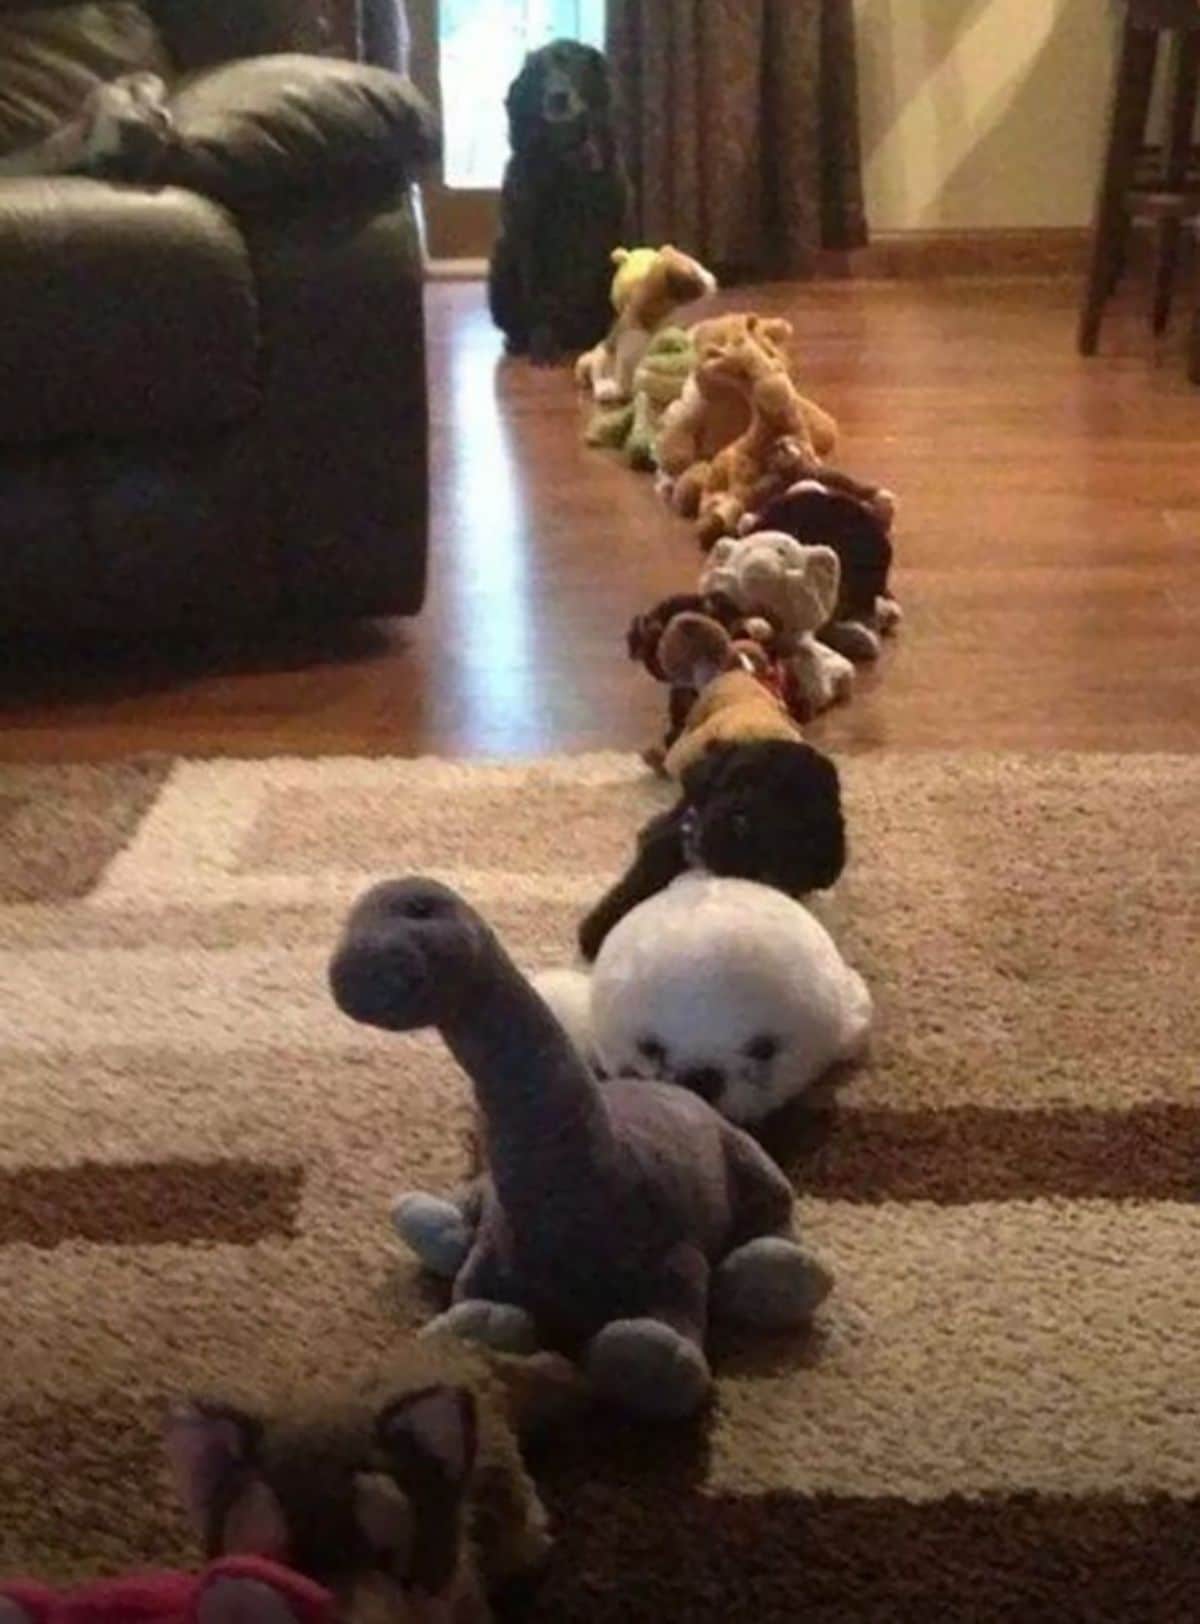 black dog sitting on the floor behind a row of stuffed toys